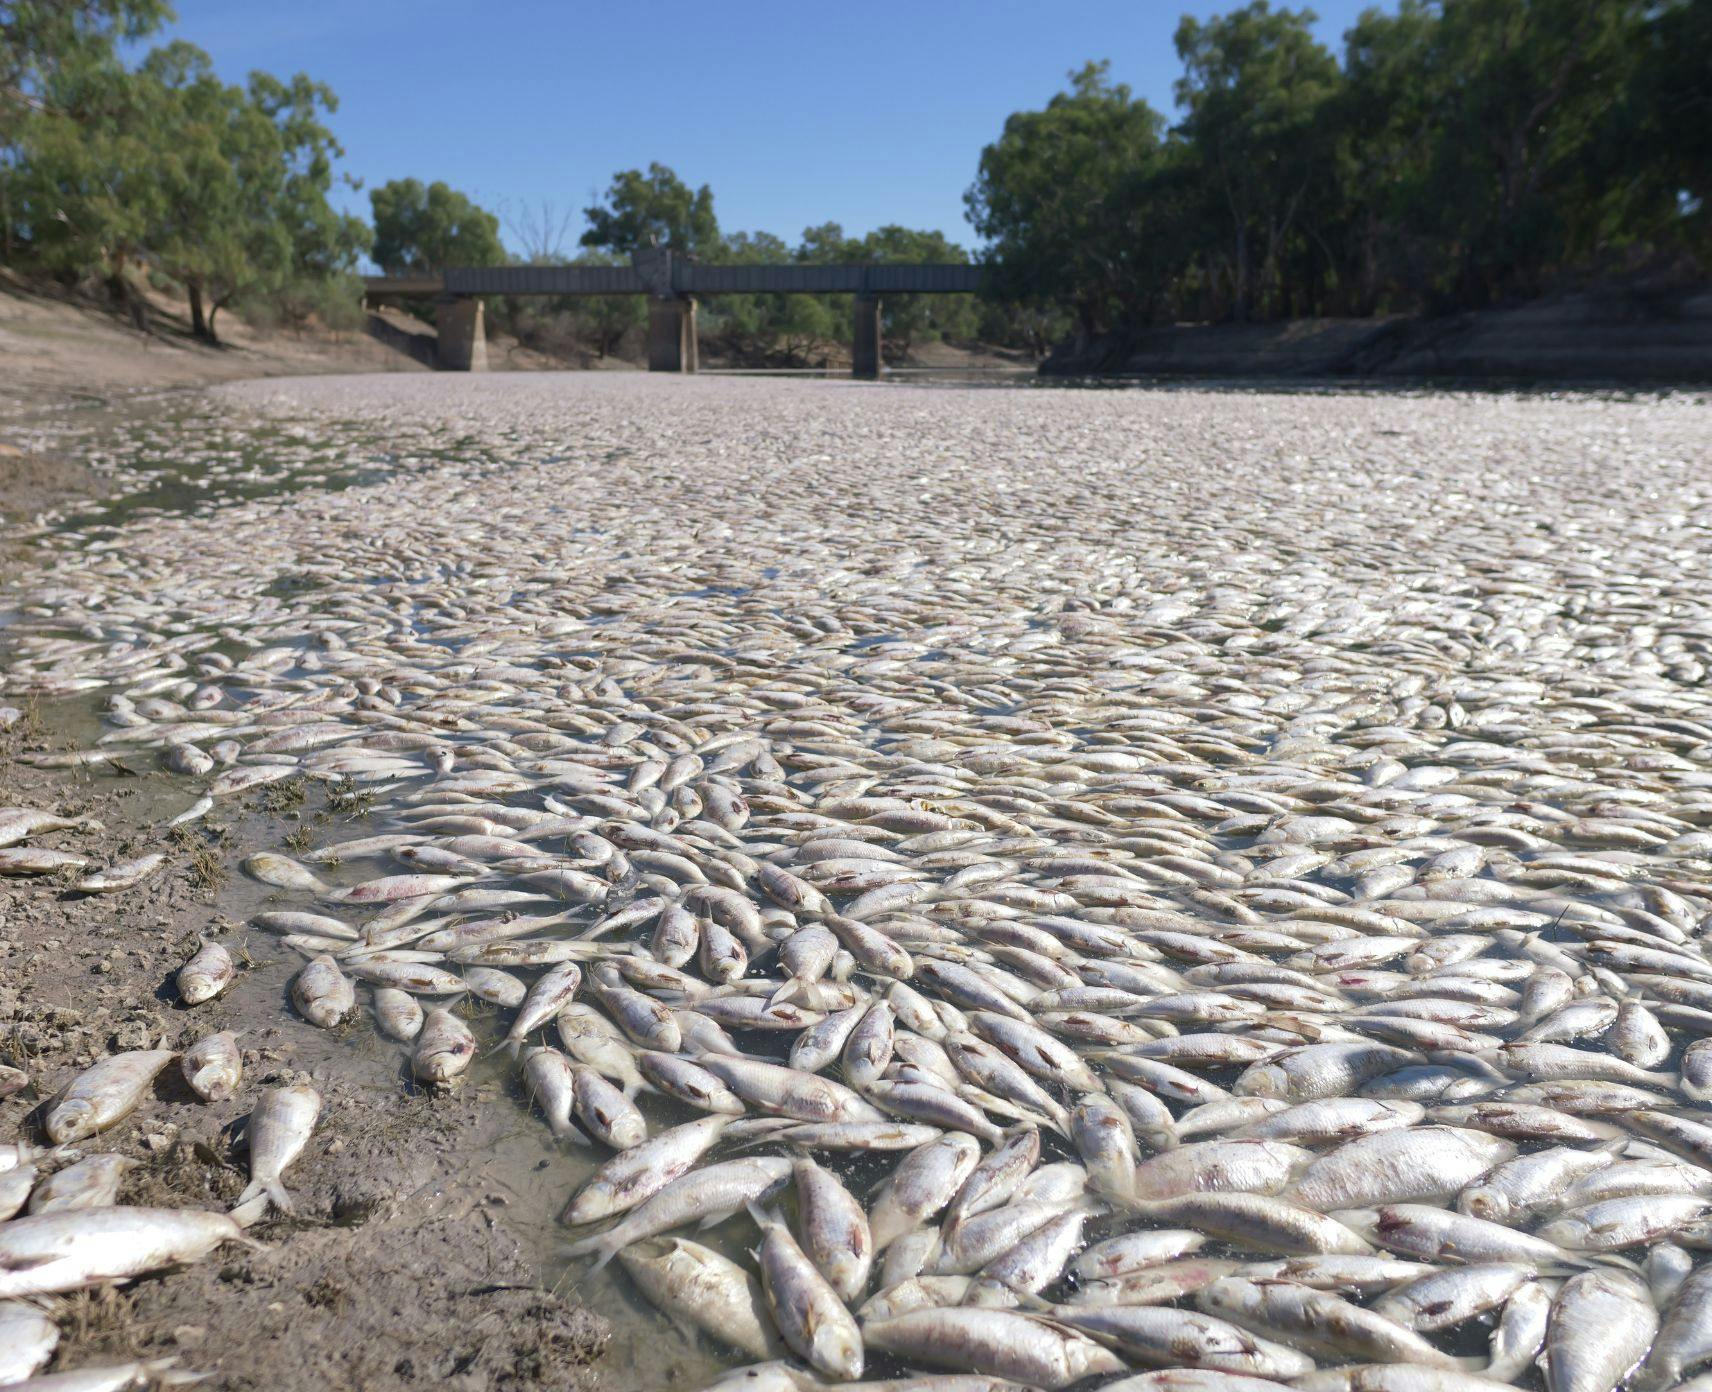 A blanket of dead fish covering the Darling-Baaka River on a blue sky day.